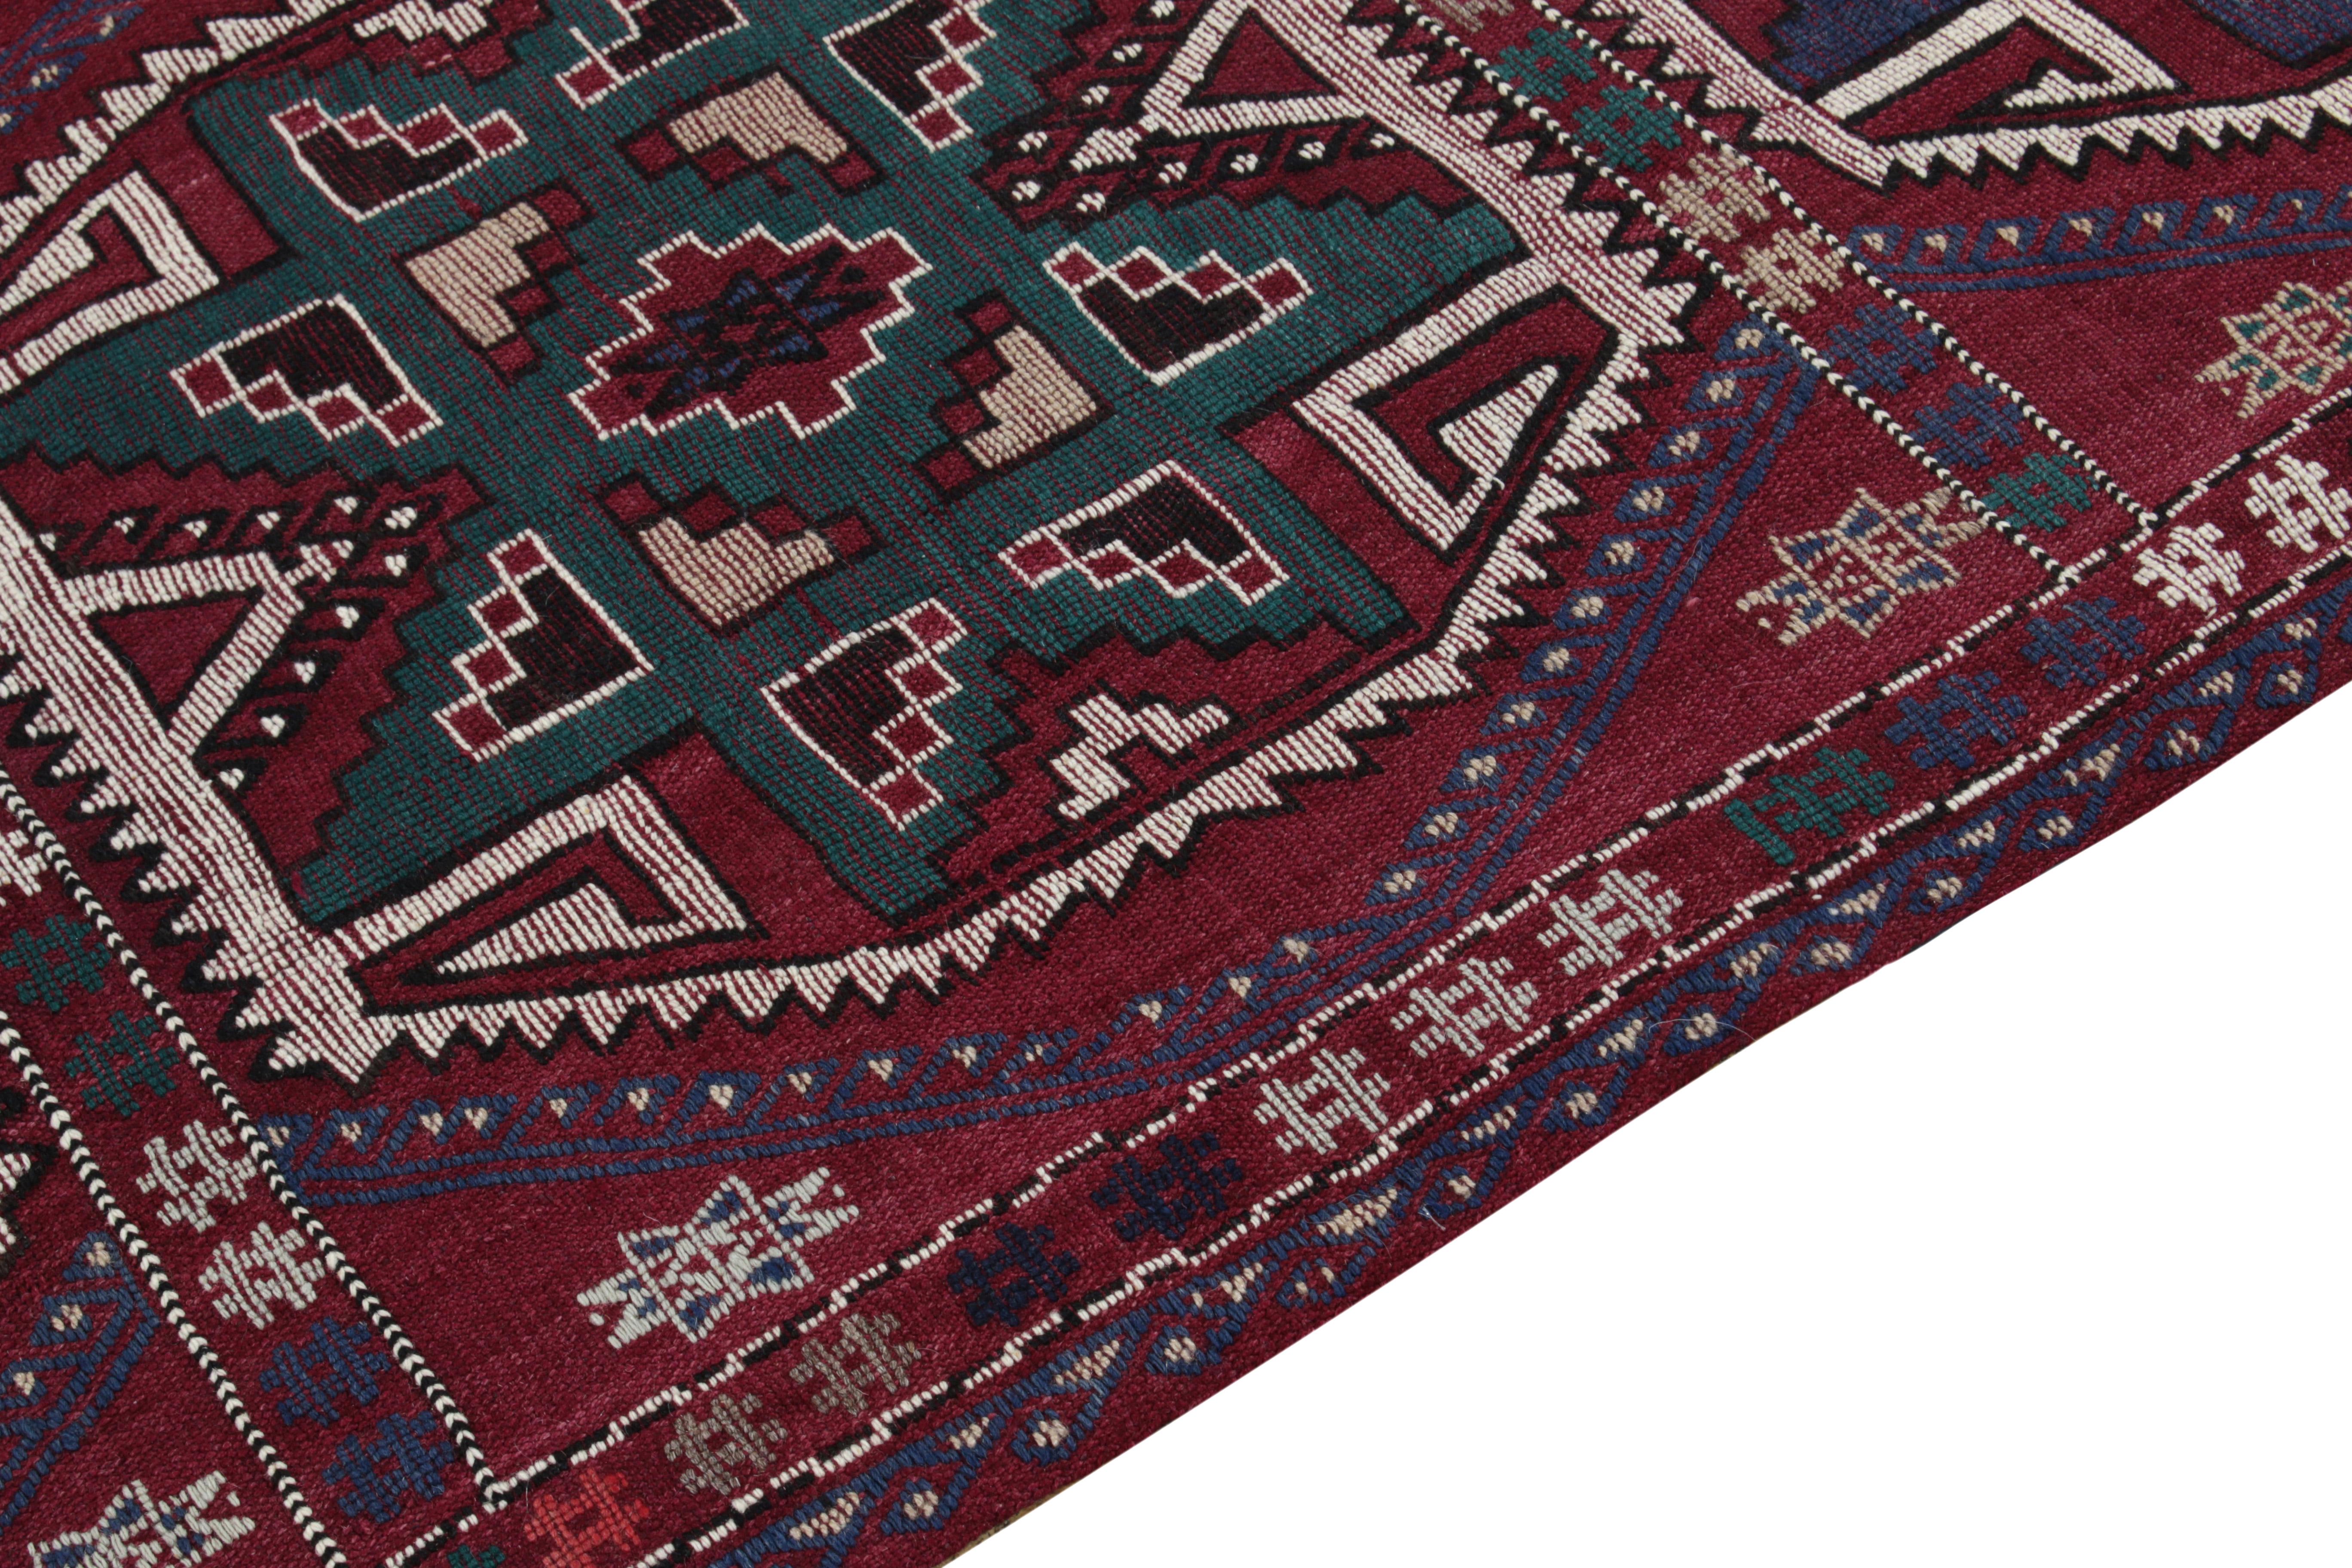 Vintage Turkish Kilim Rug in Wine, Teal & White Geometric Pattern by Rug & Kilim In Good Condition For Sale In Long Island City, NY